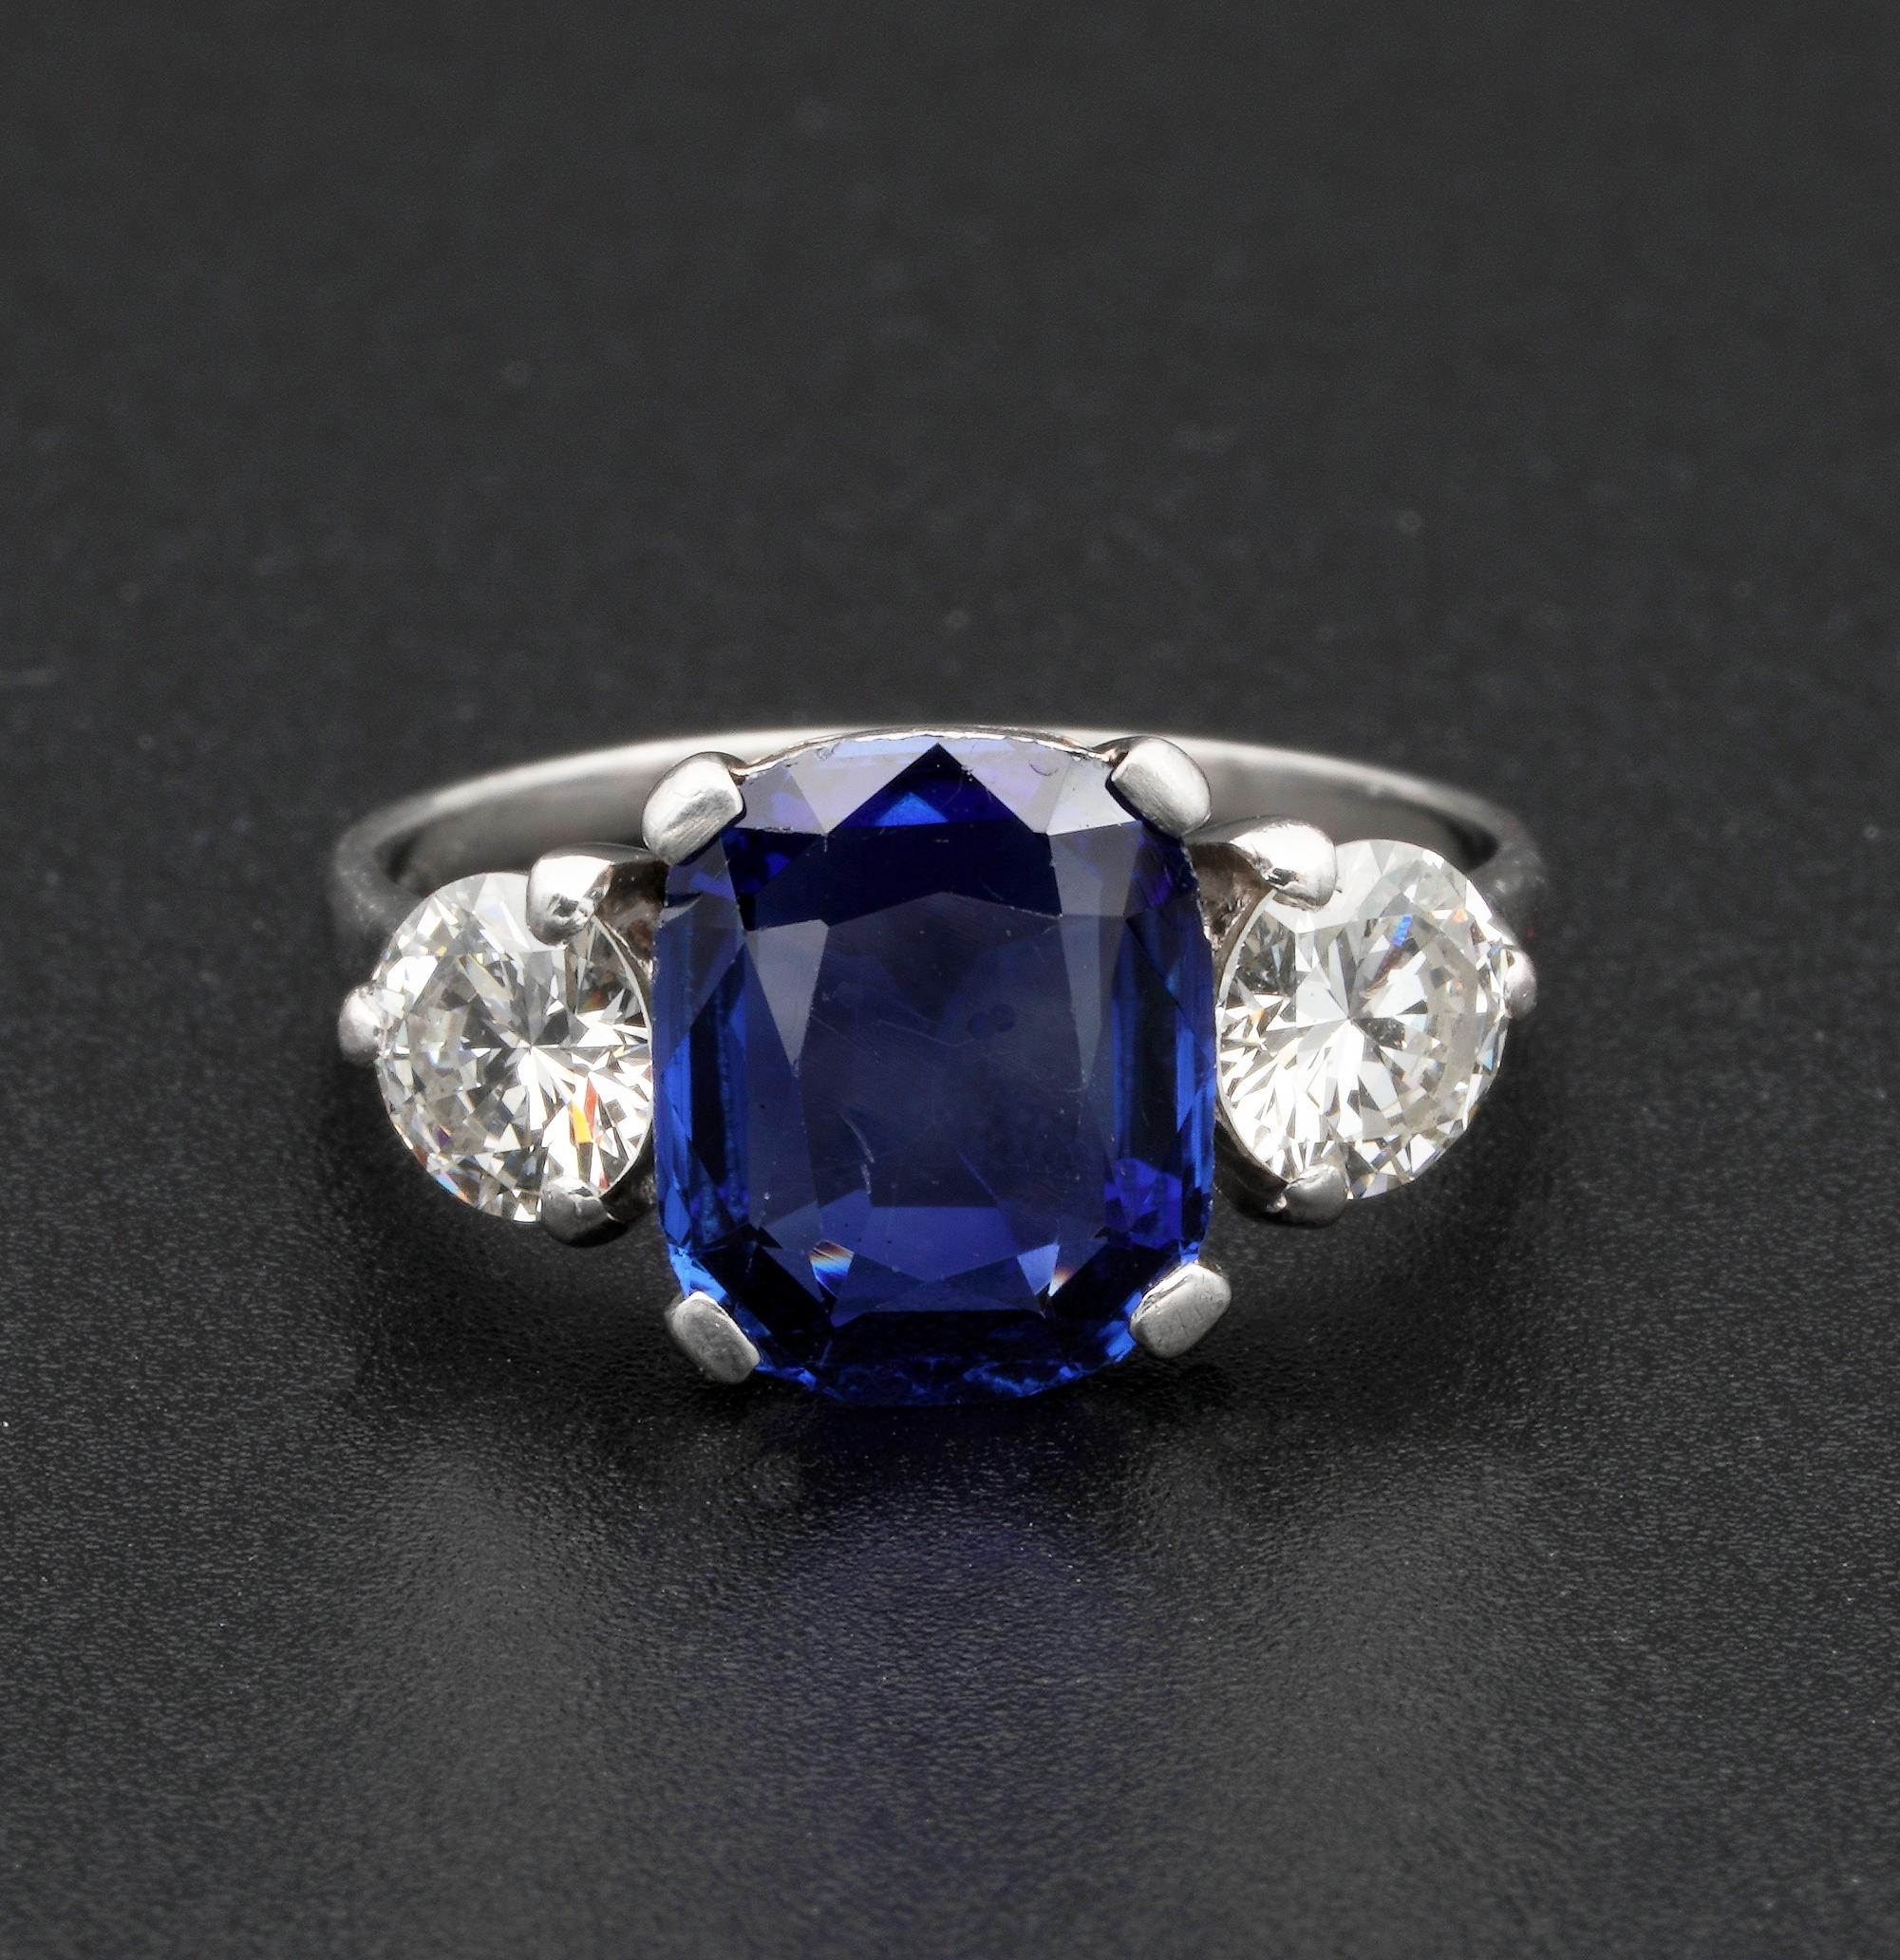 Seal of Love

One of the most desired and ever prized Sapphire is from Burma (Myanmar) – rare, precious, powerful, mysterious, magical. No wonder Royalty used Sapphire to command authority
This absolutely breathtaking trilogy ring, is an authentic